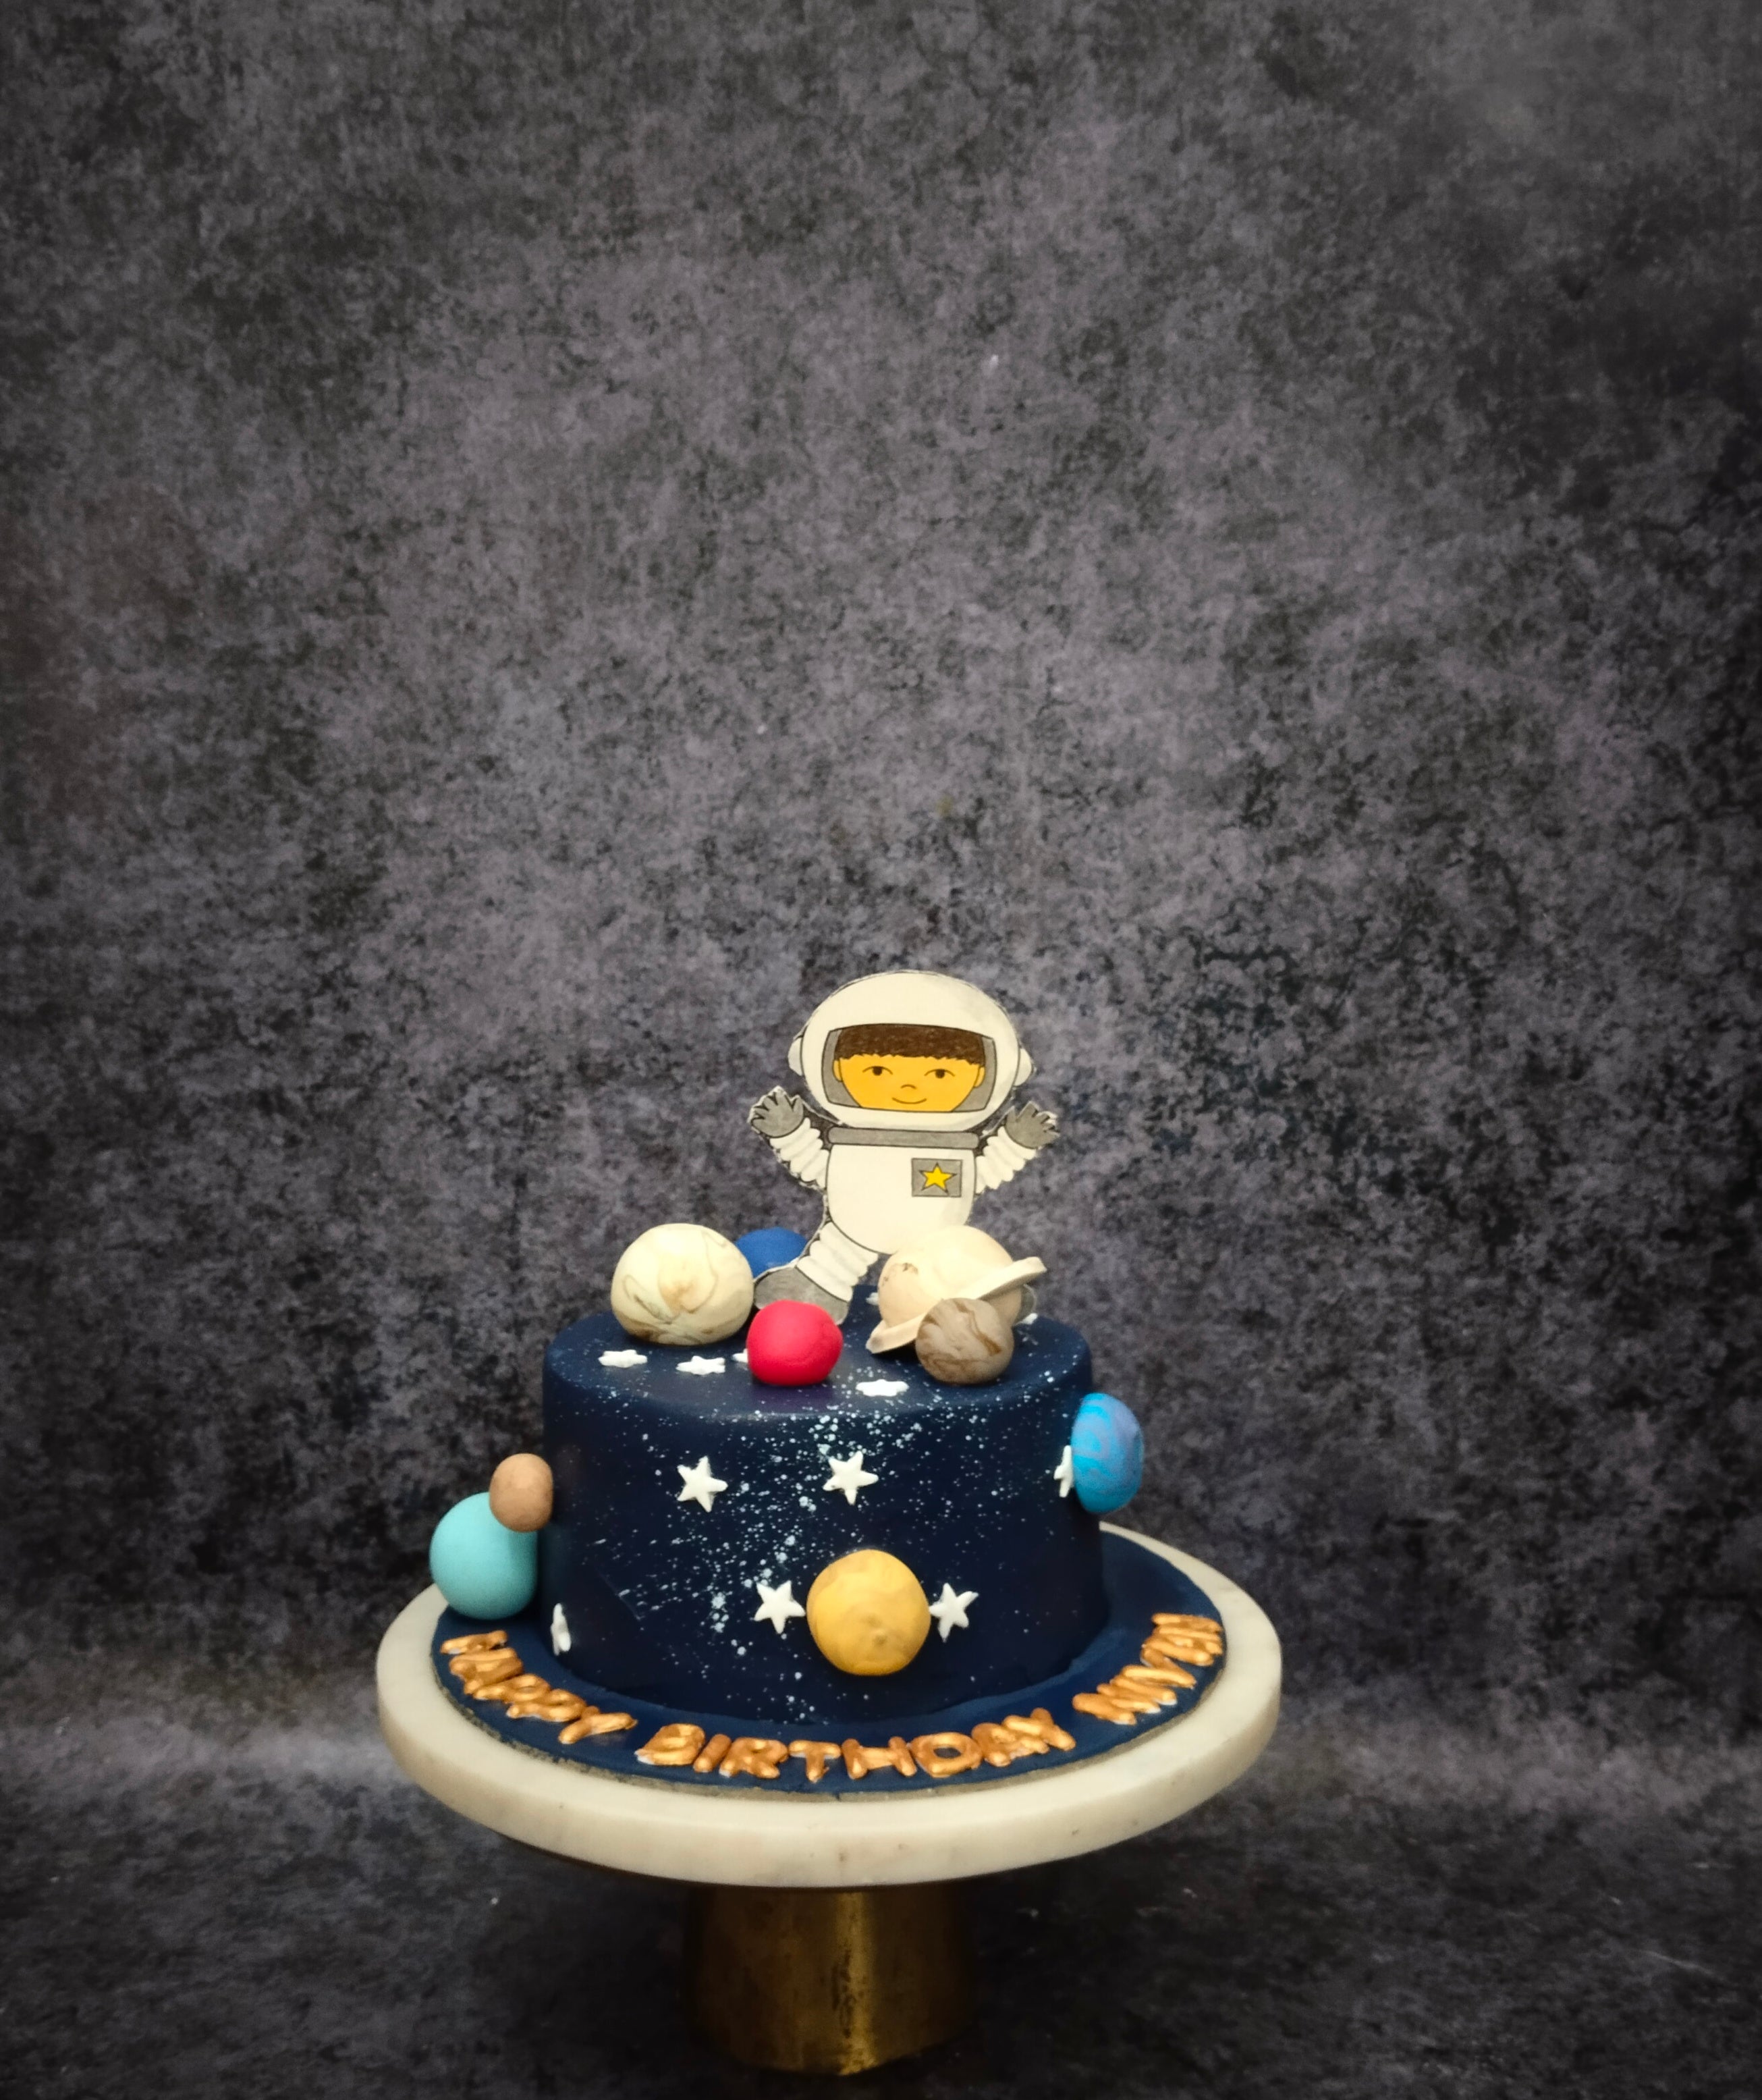 Astronaut edible cake muffin party decoration birthday new planet gift |  eBay